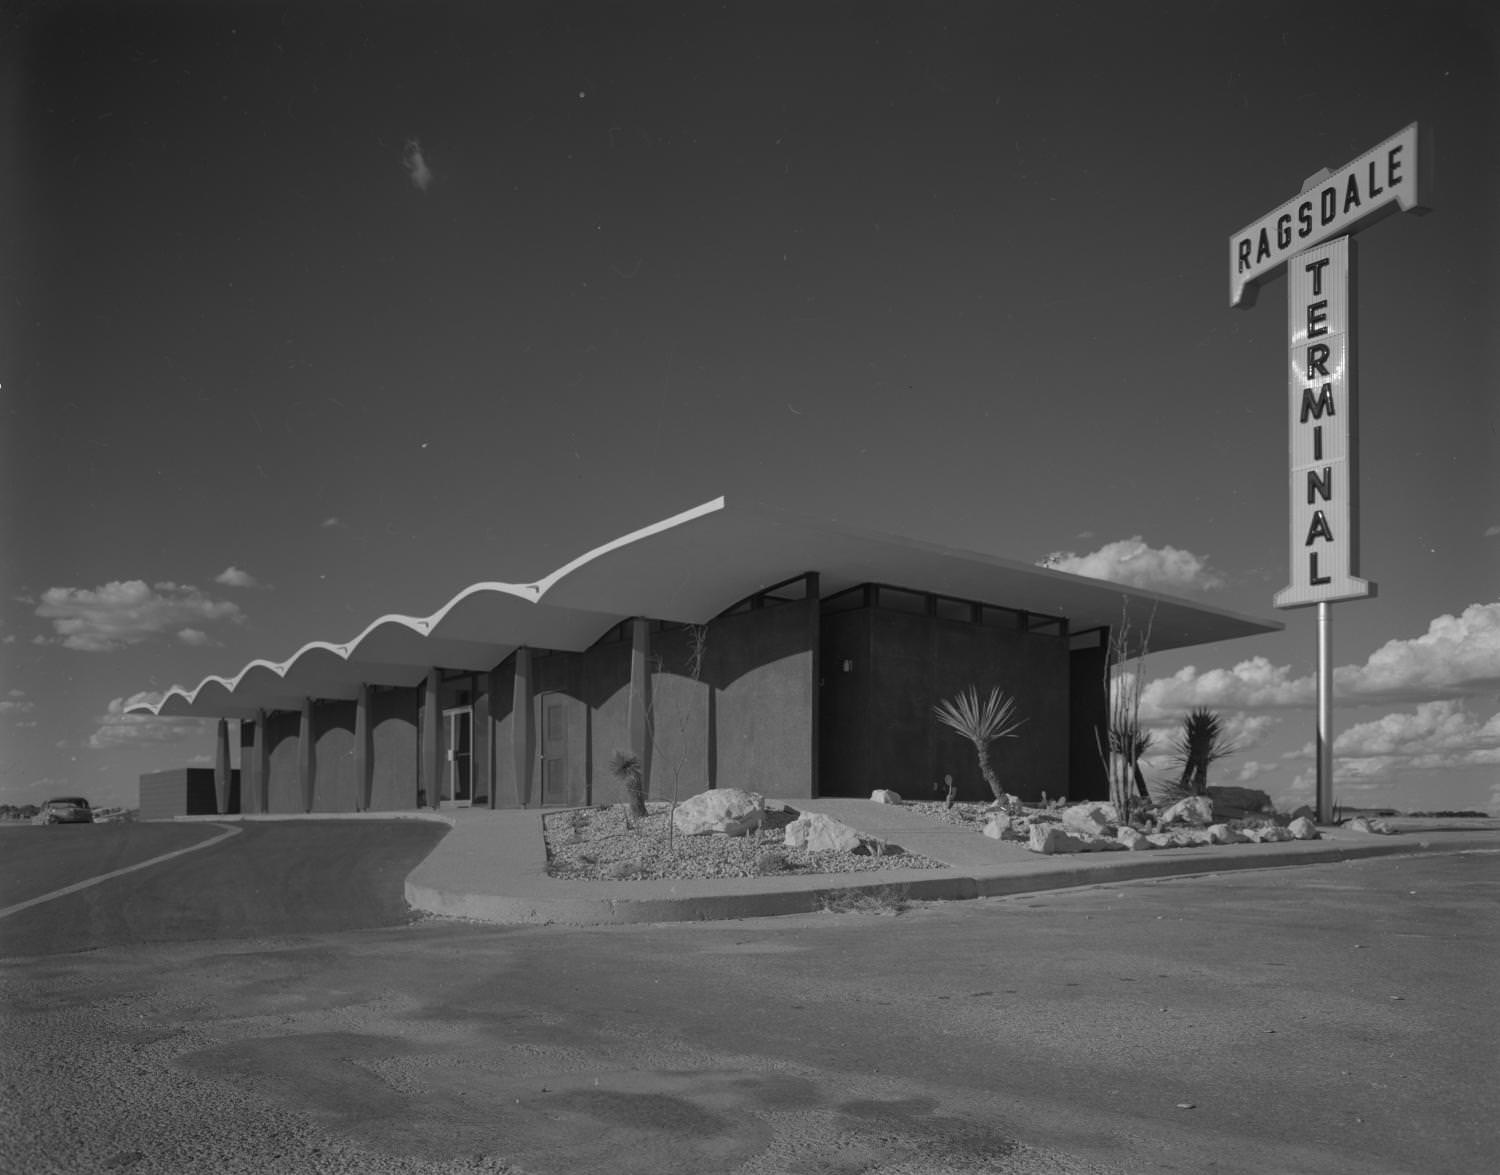 Ragsdale Terminal with an exterior facade that is dark with matching dark columns that can be seen on the left wall, along with a glass door entrance, 1962